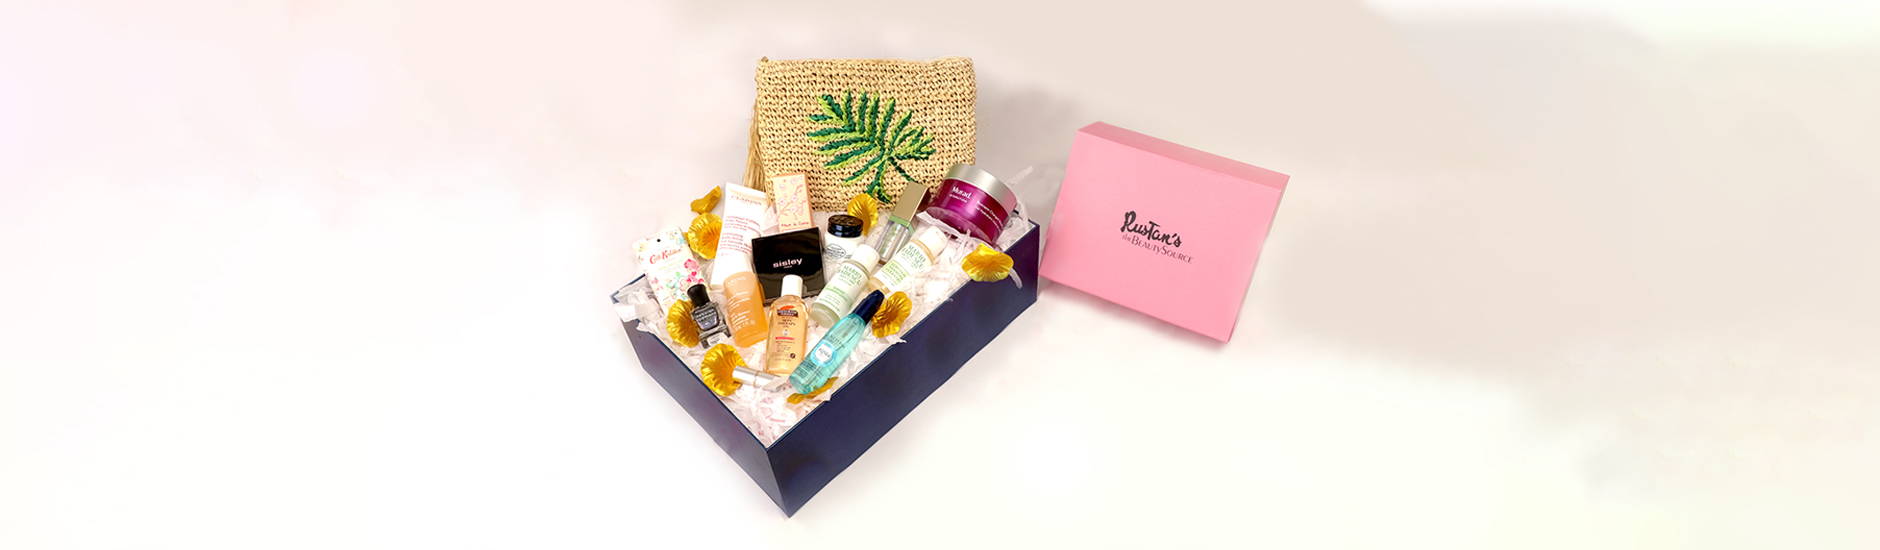 Giveaway Alert: Nicole Andersson’s Beauty Box